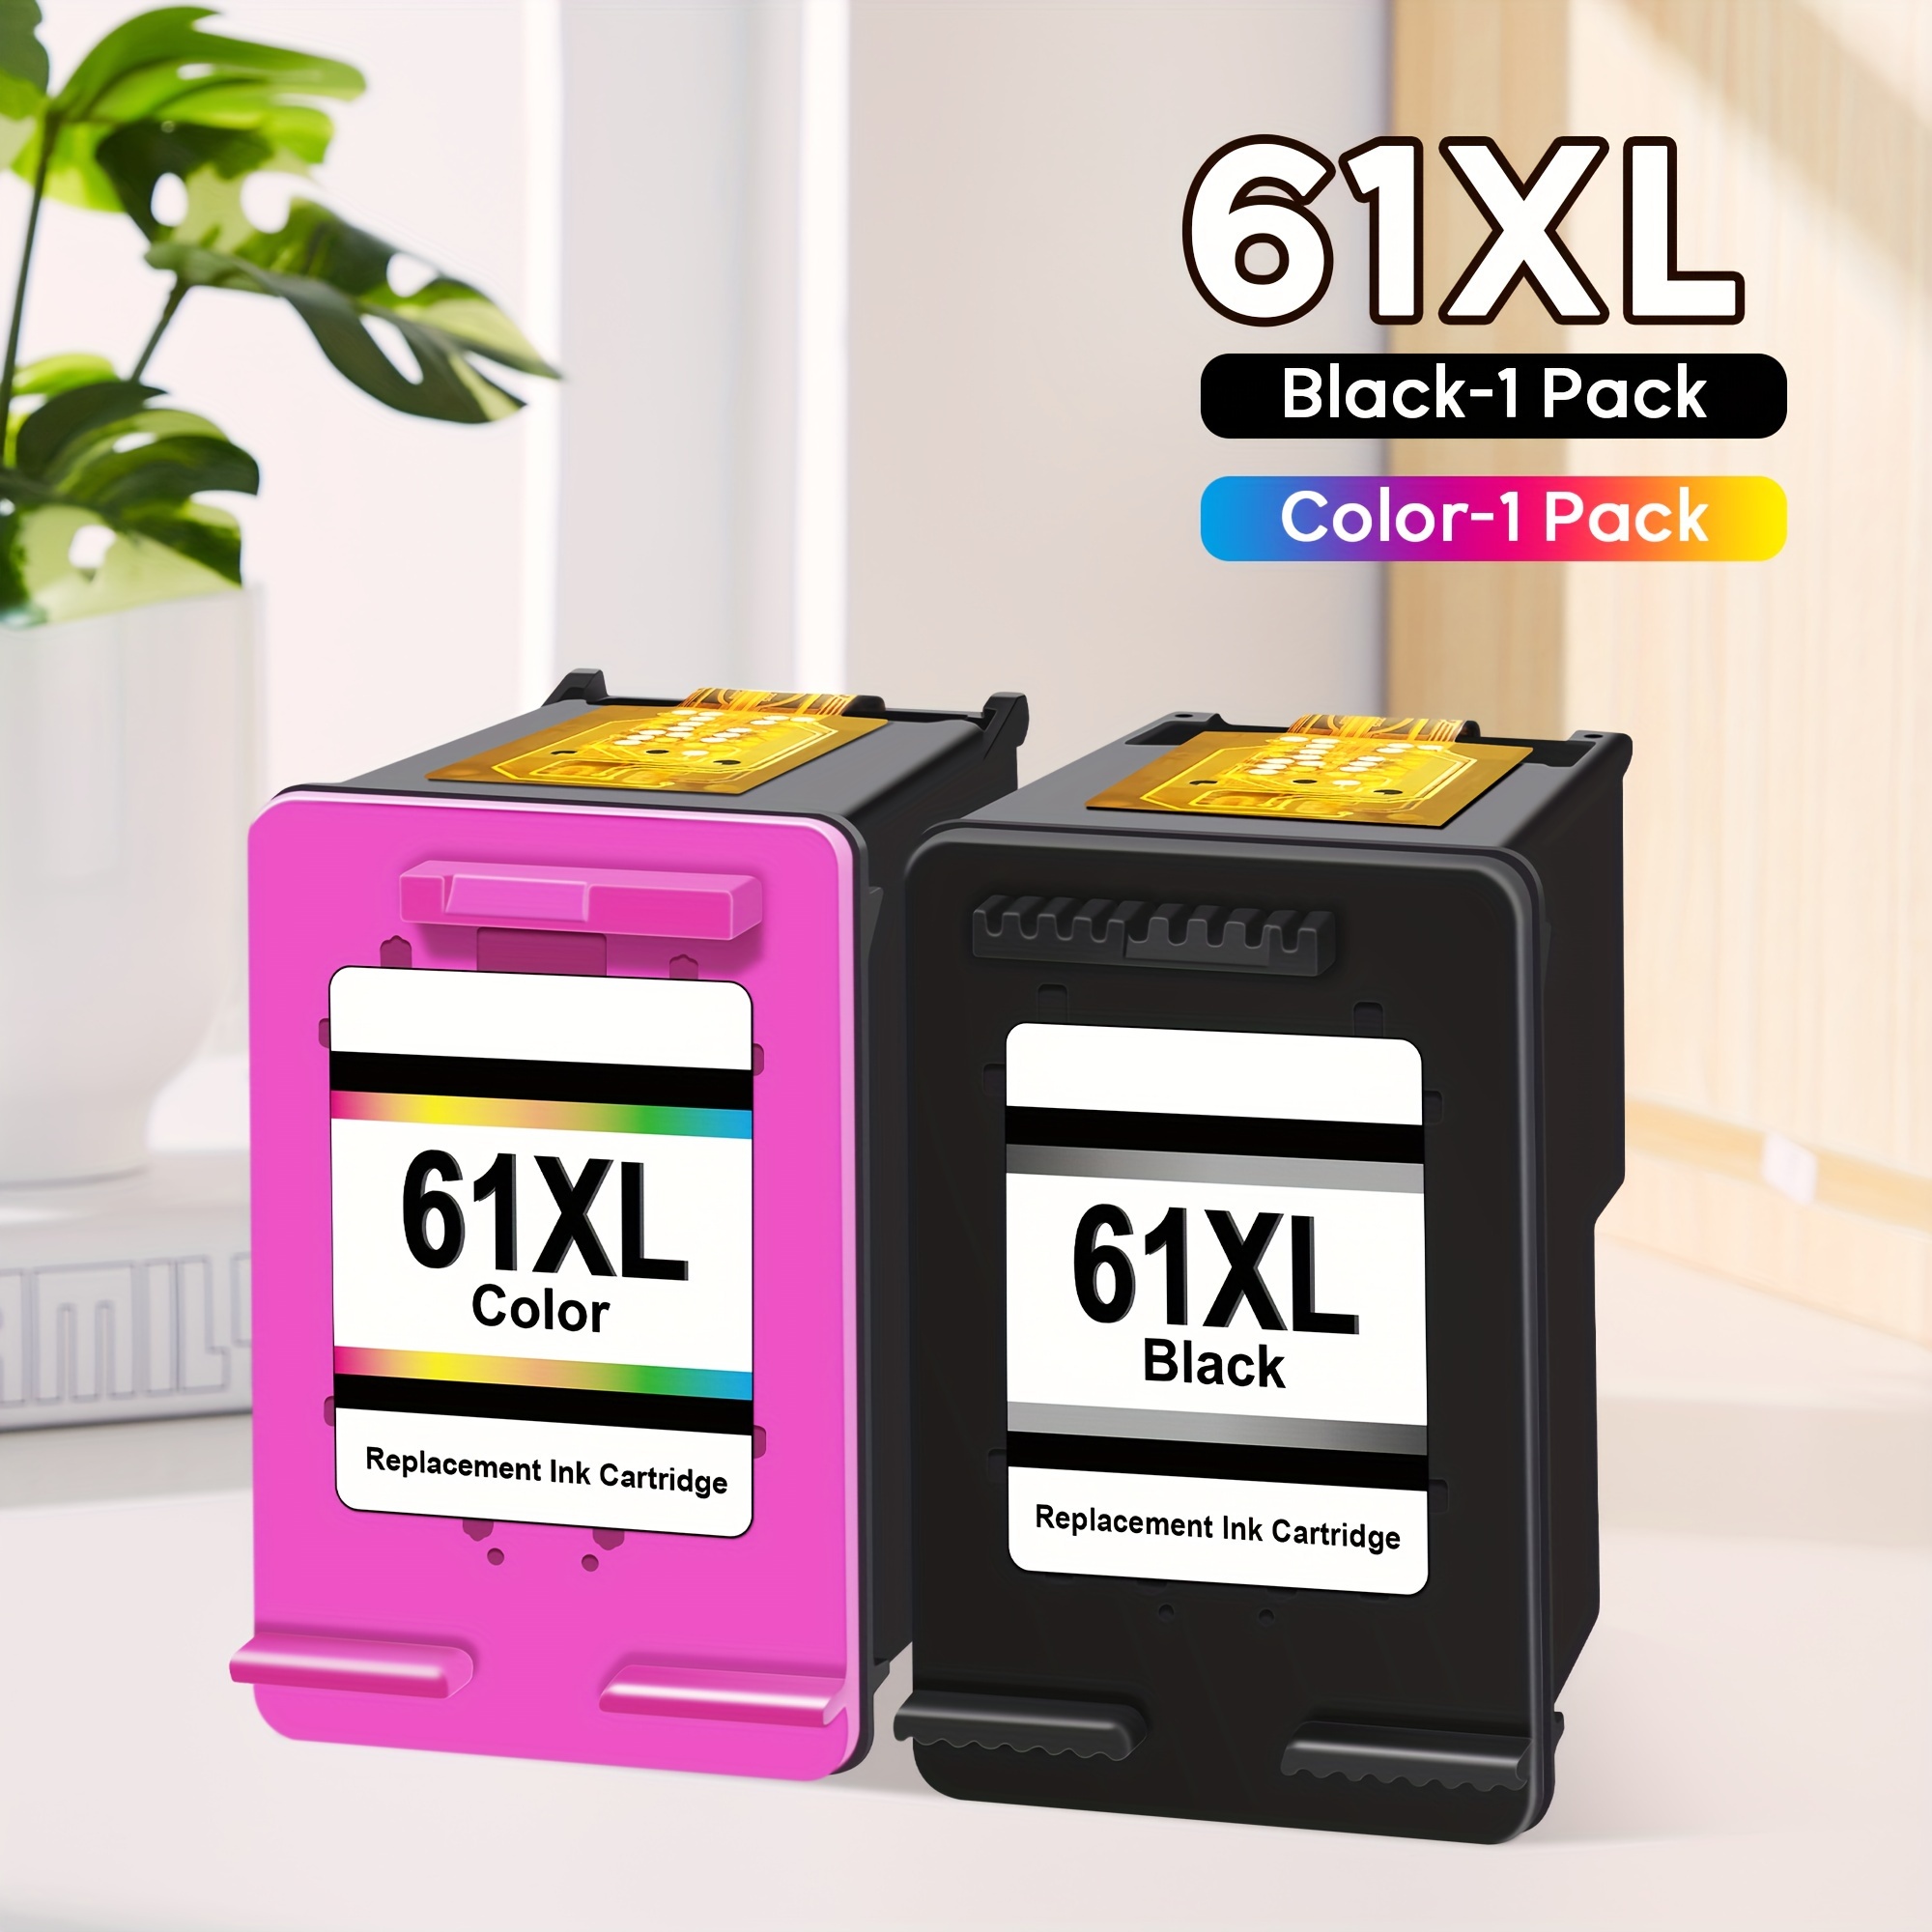 

2 Pack 61 Remanufactured Ink Cartridge Replacement For Ink 61 (black Color 2-pack) 61xl Combo For Hp61 4500 5530 4502 2540 1000 1055 1010 1510 3050 4630 2620 4501 4635 4632 2542 Printer Bk Tricolor